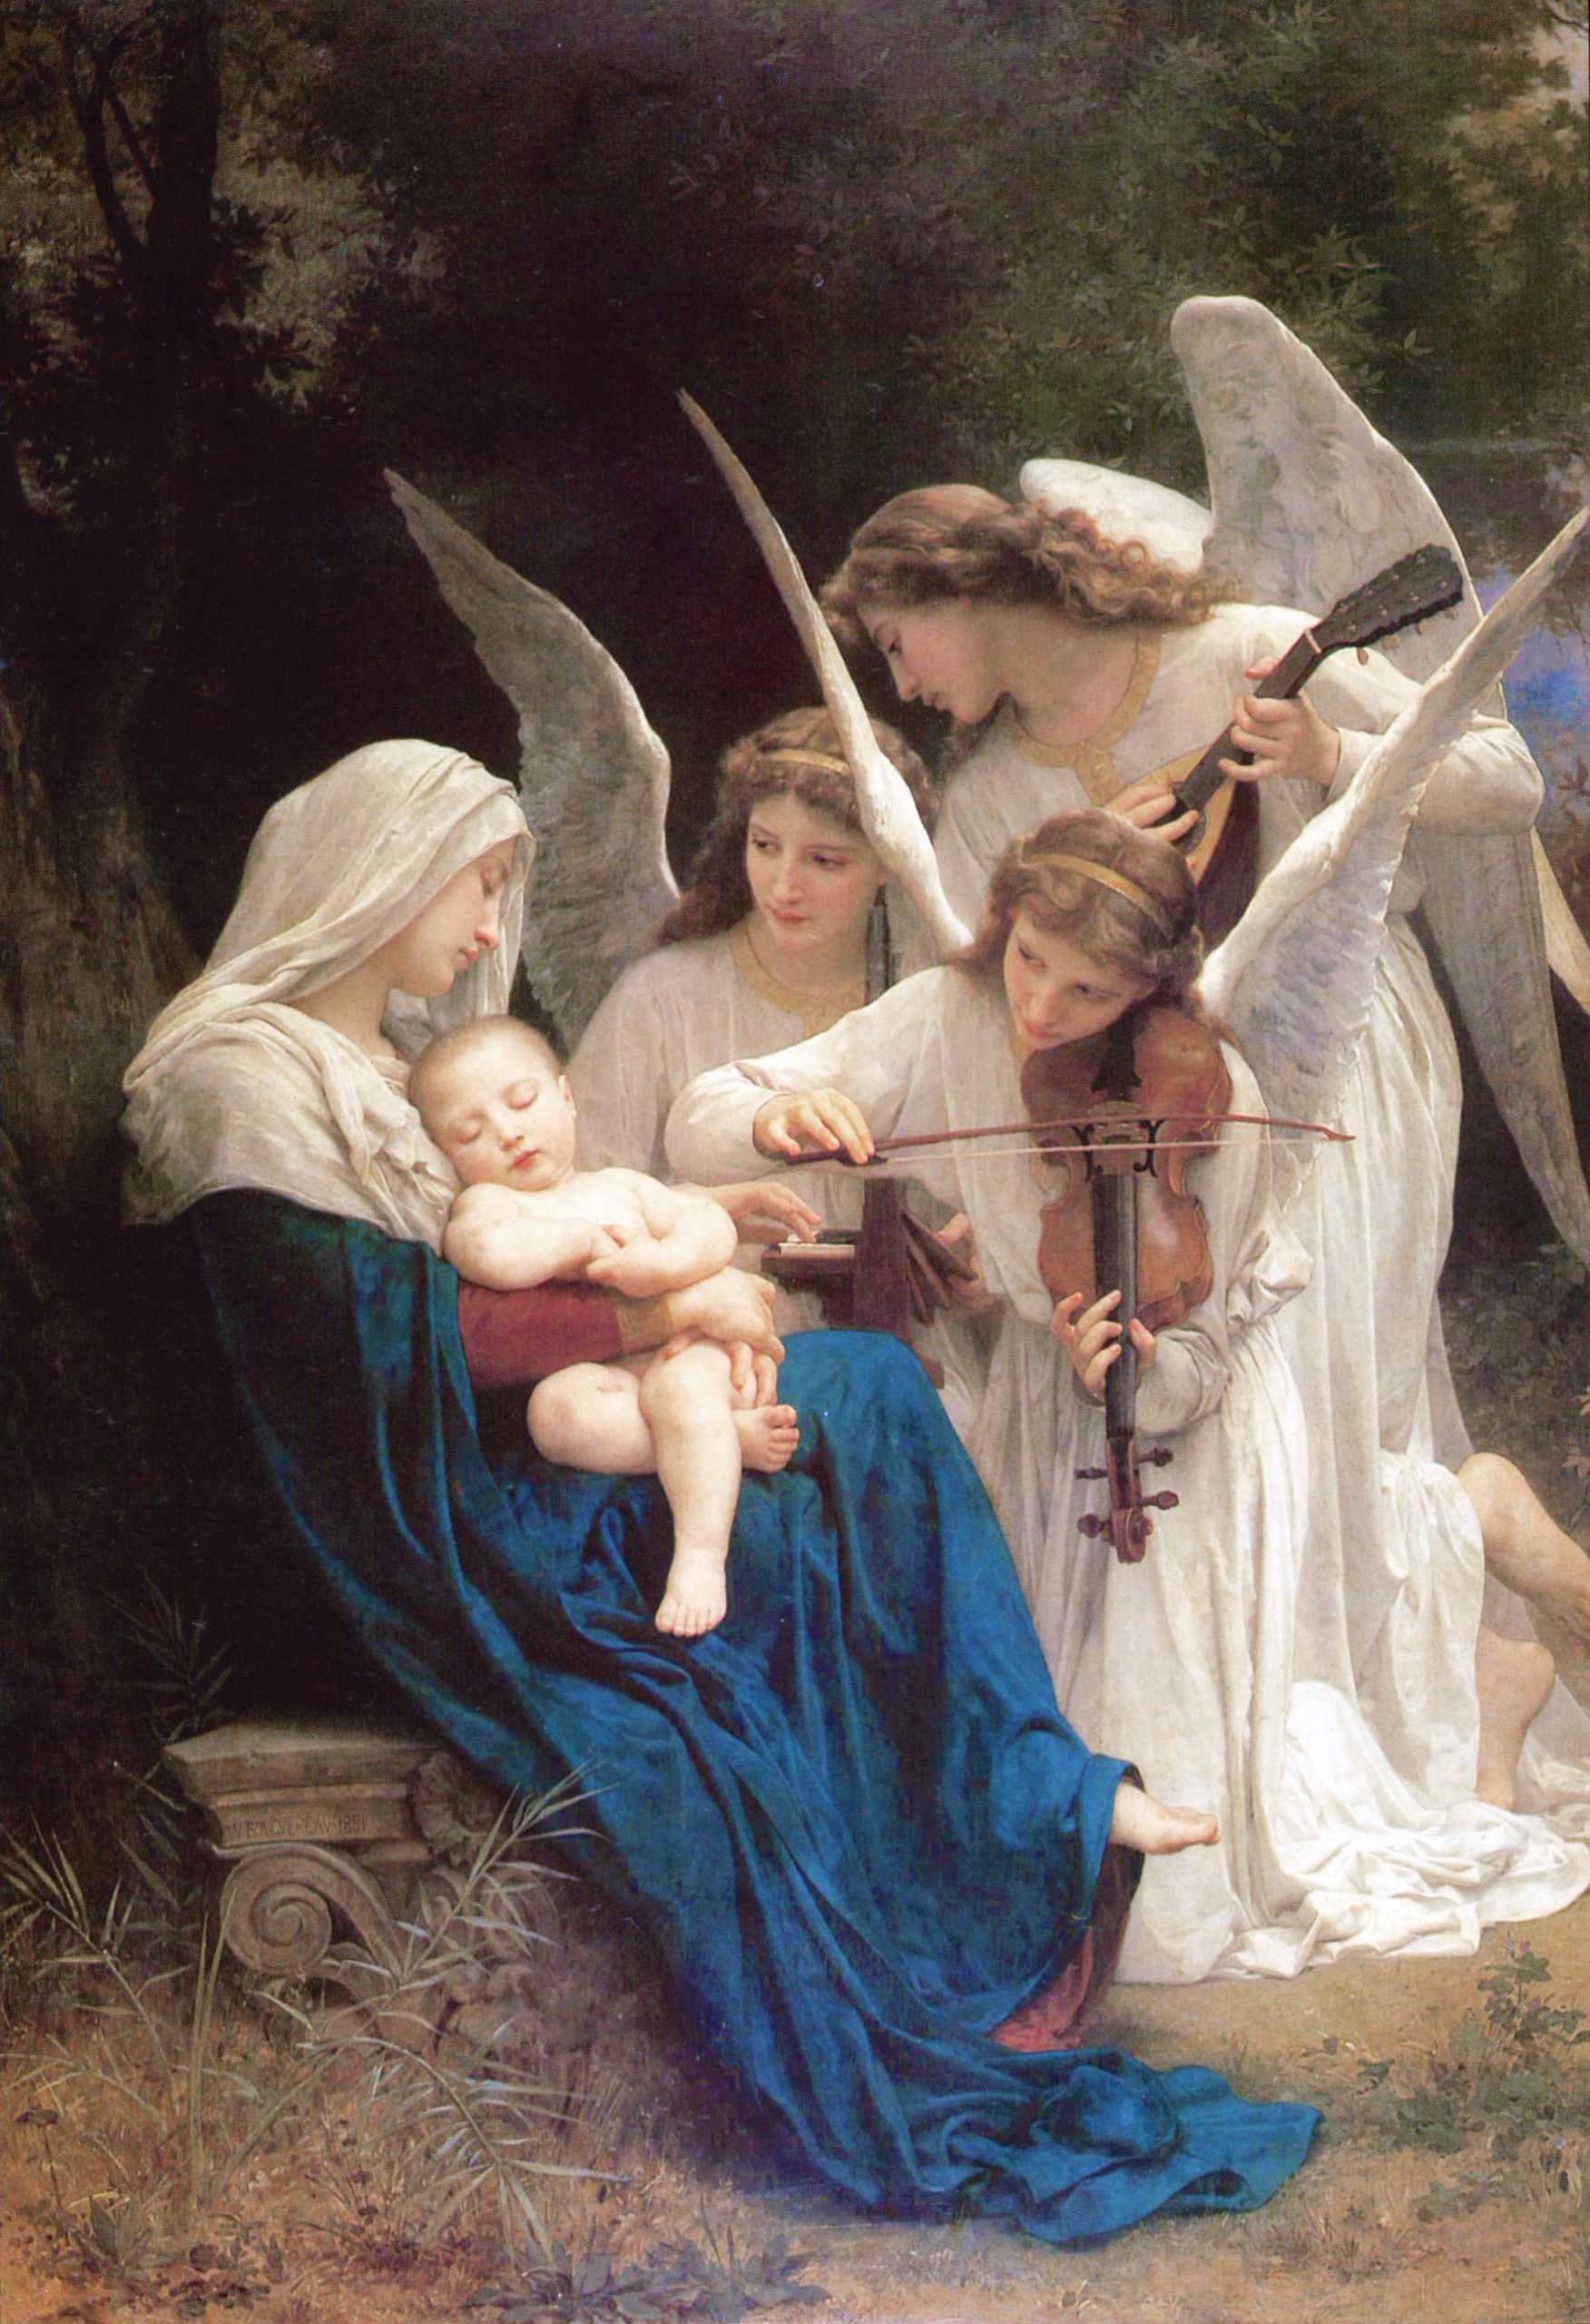 A sleeping woman holds a sleeping baby in her lap while three angels surround her and to play her music from stringed instruments.